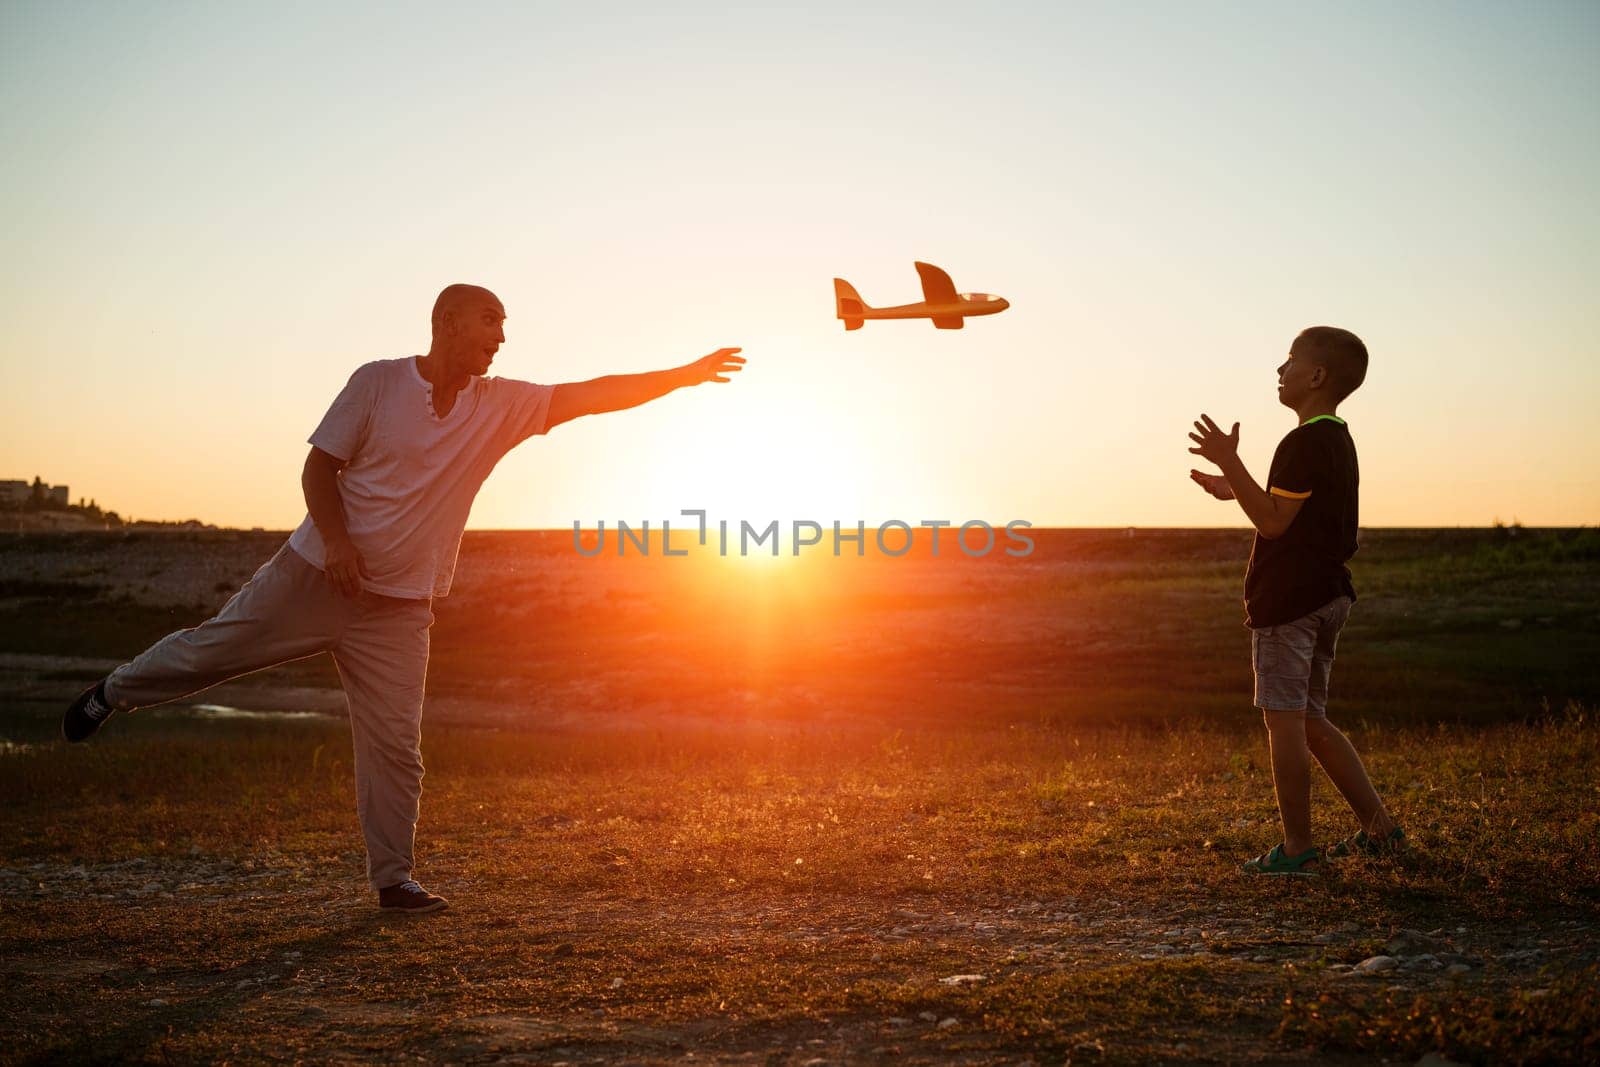 Soft focus of father and son playing toy airplane in meadow at sunset with happy emotions. Family, vacation and travel concept. At sunset in summer they launch an airplane against background sky